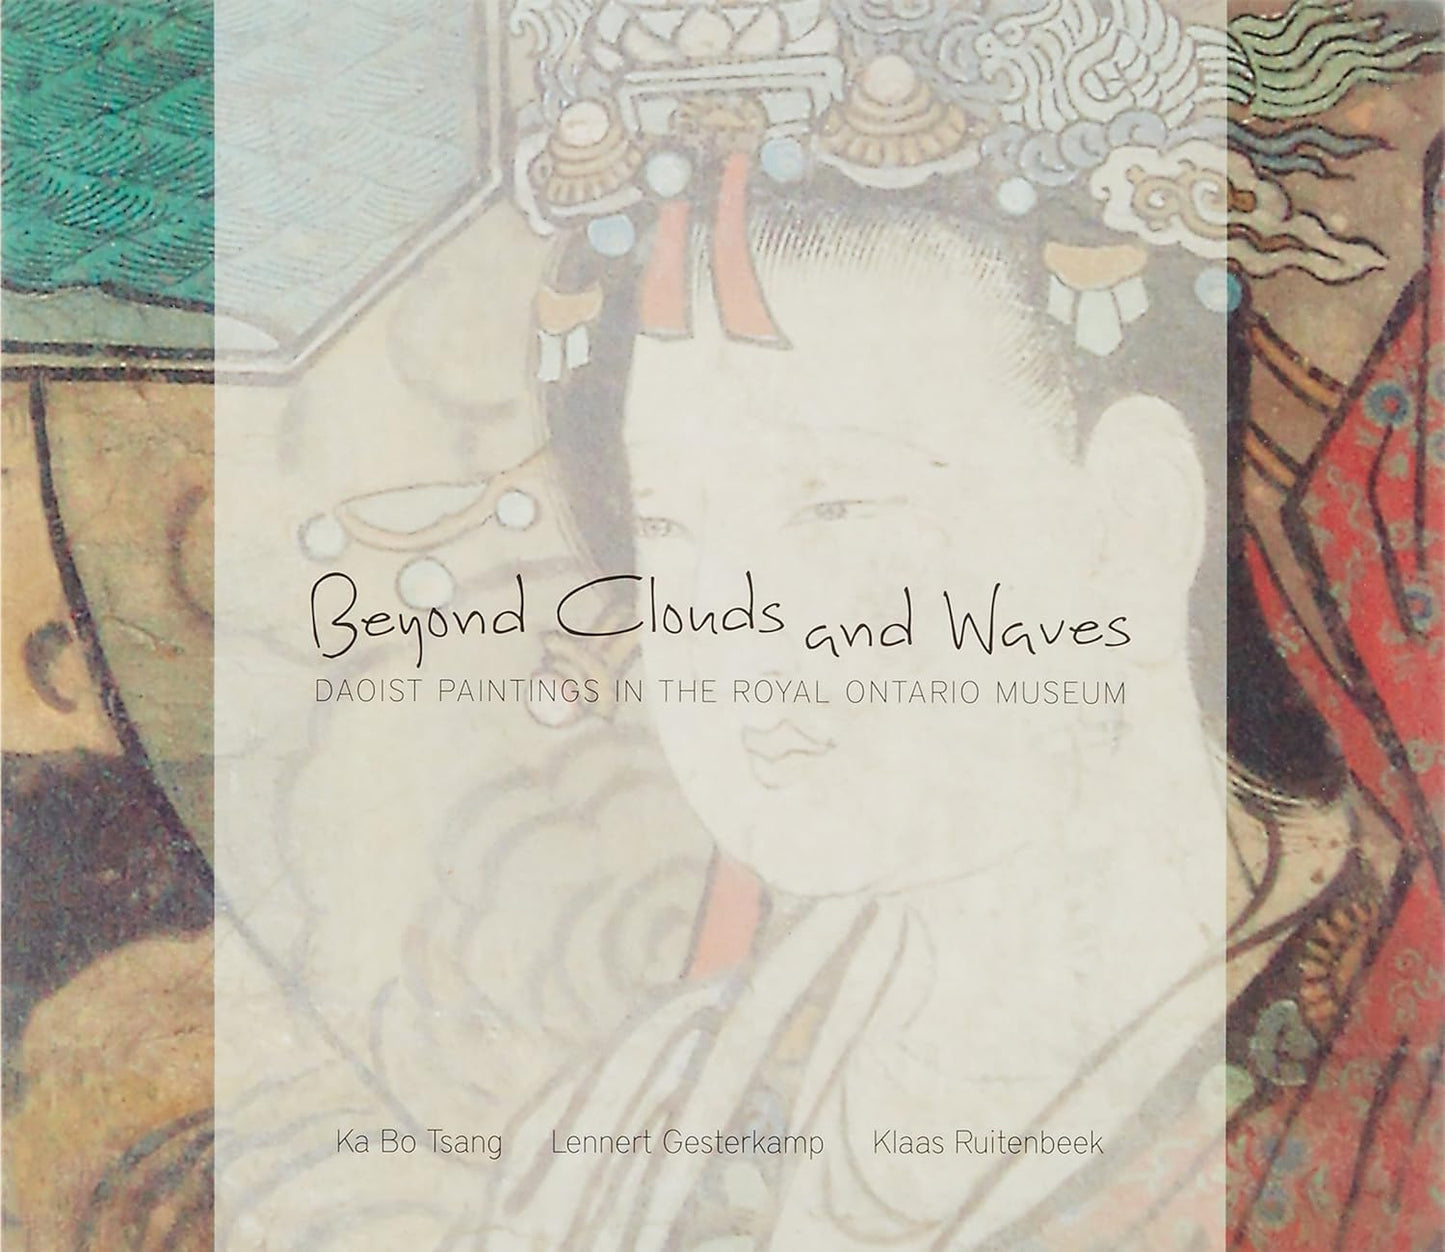 Beyond Clouds and Waves: Daoist Paintings in the Royal Ontario Museum (Paperback)